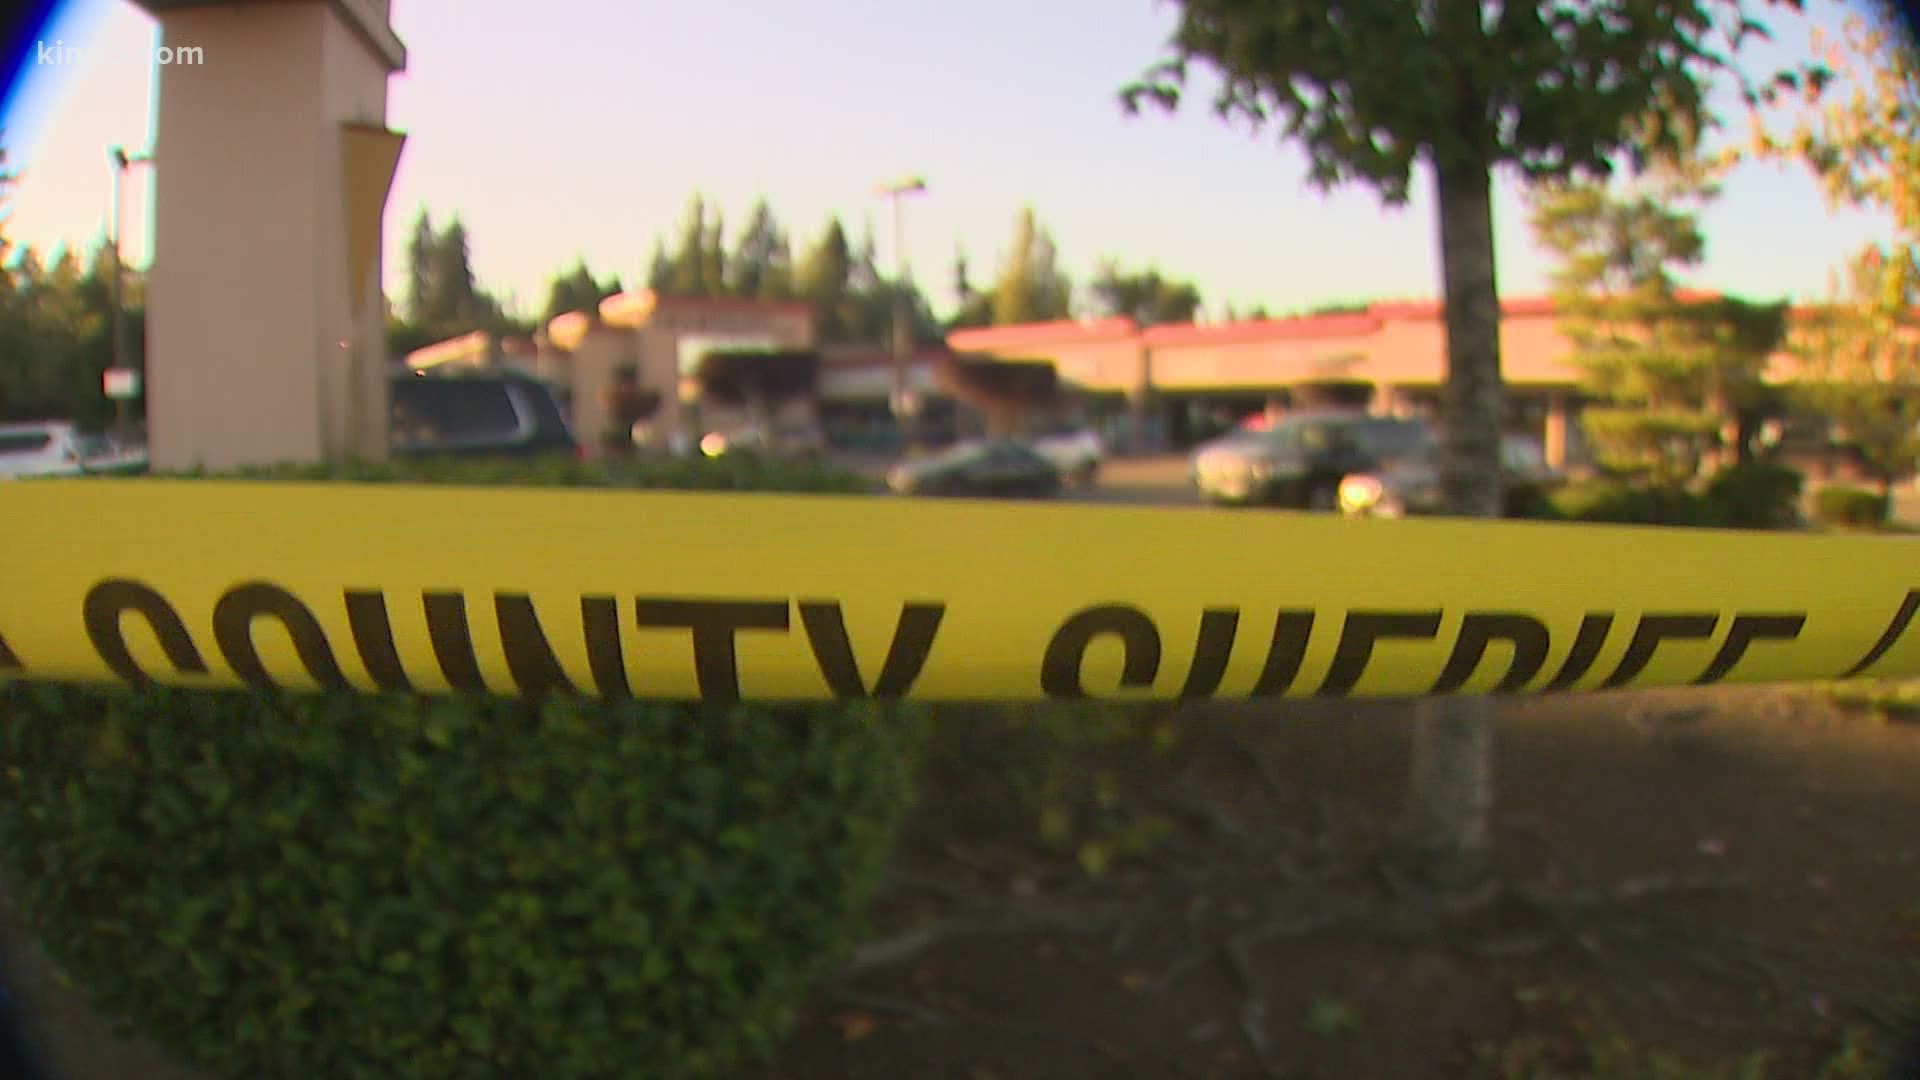 Edmonds police say three people were shot at a busy market, one of whom died. They think it was a targeted attack.